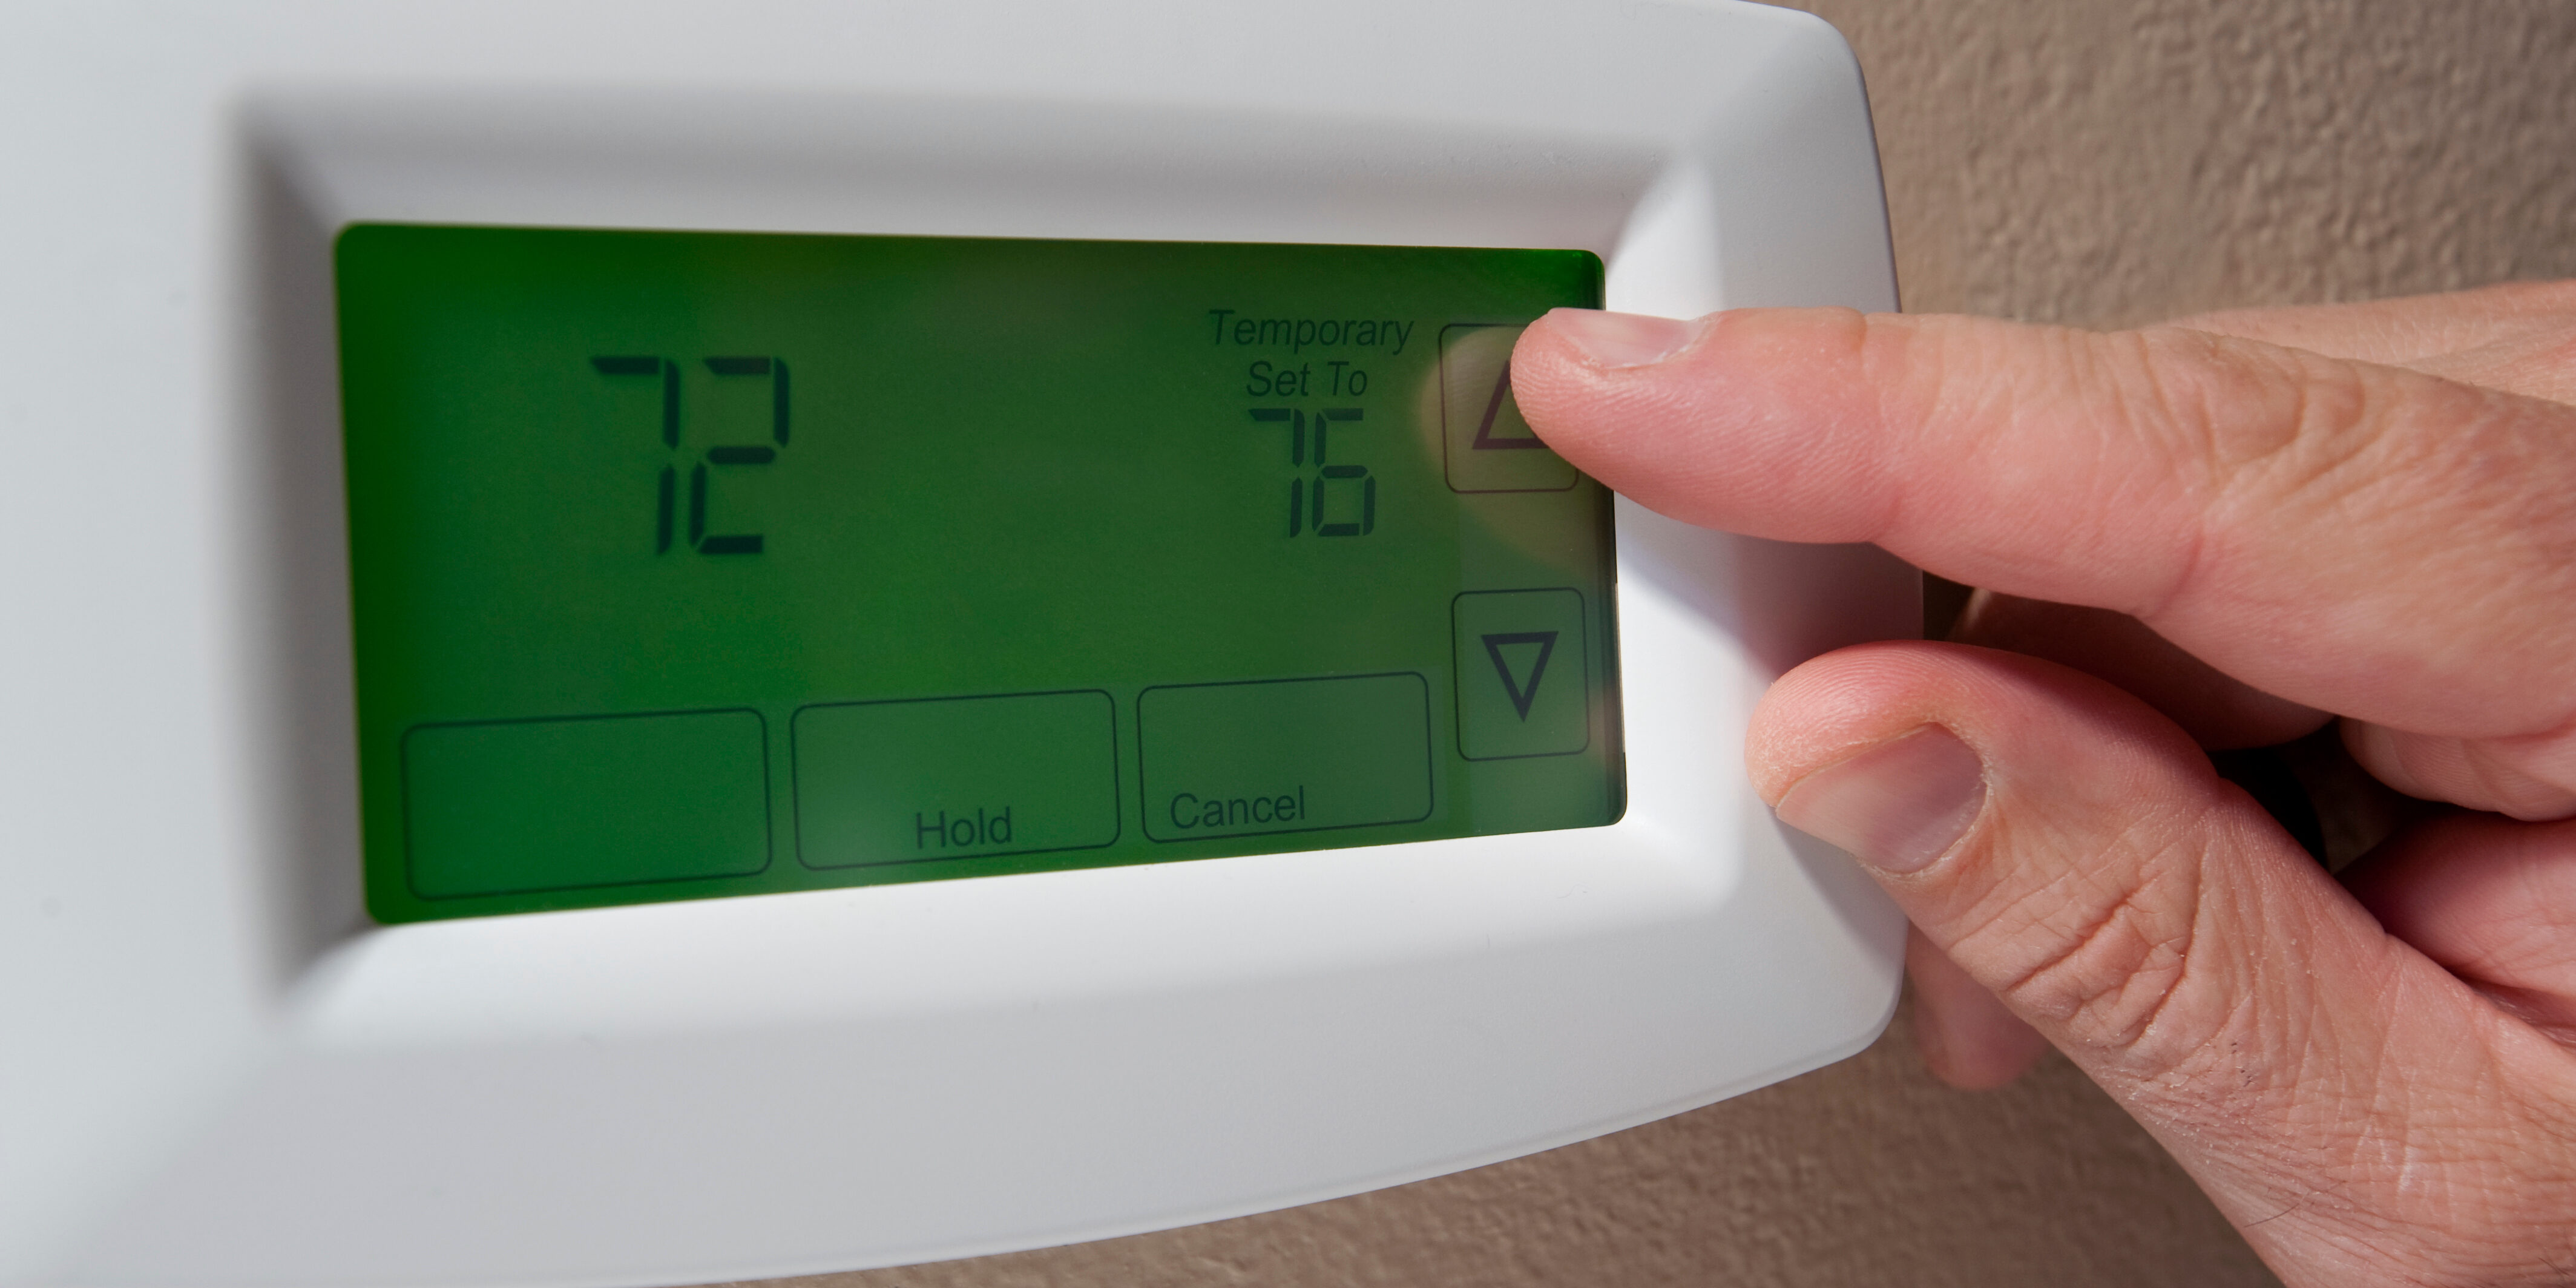 Changing the temperature on a digital thermostat